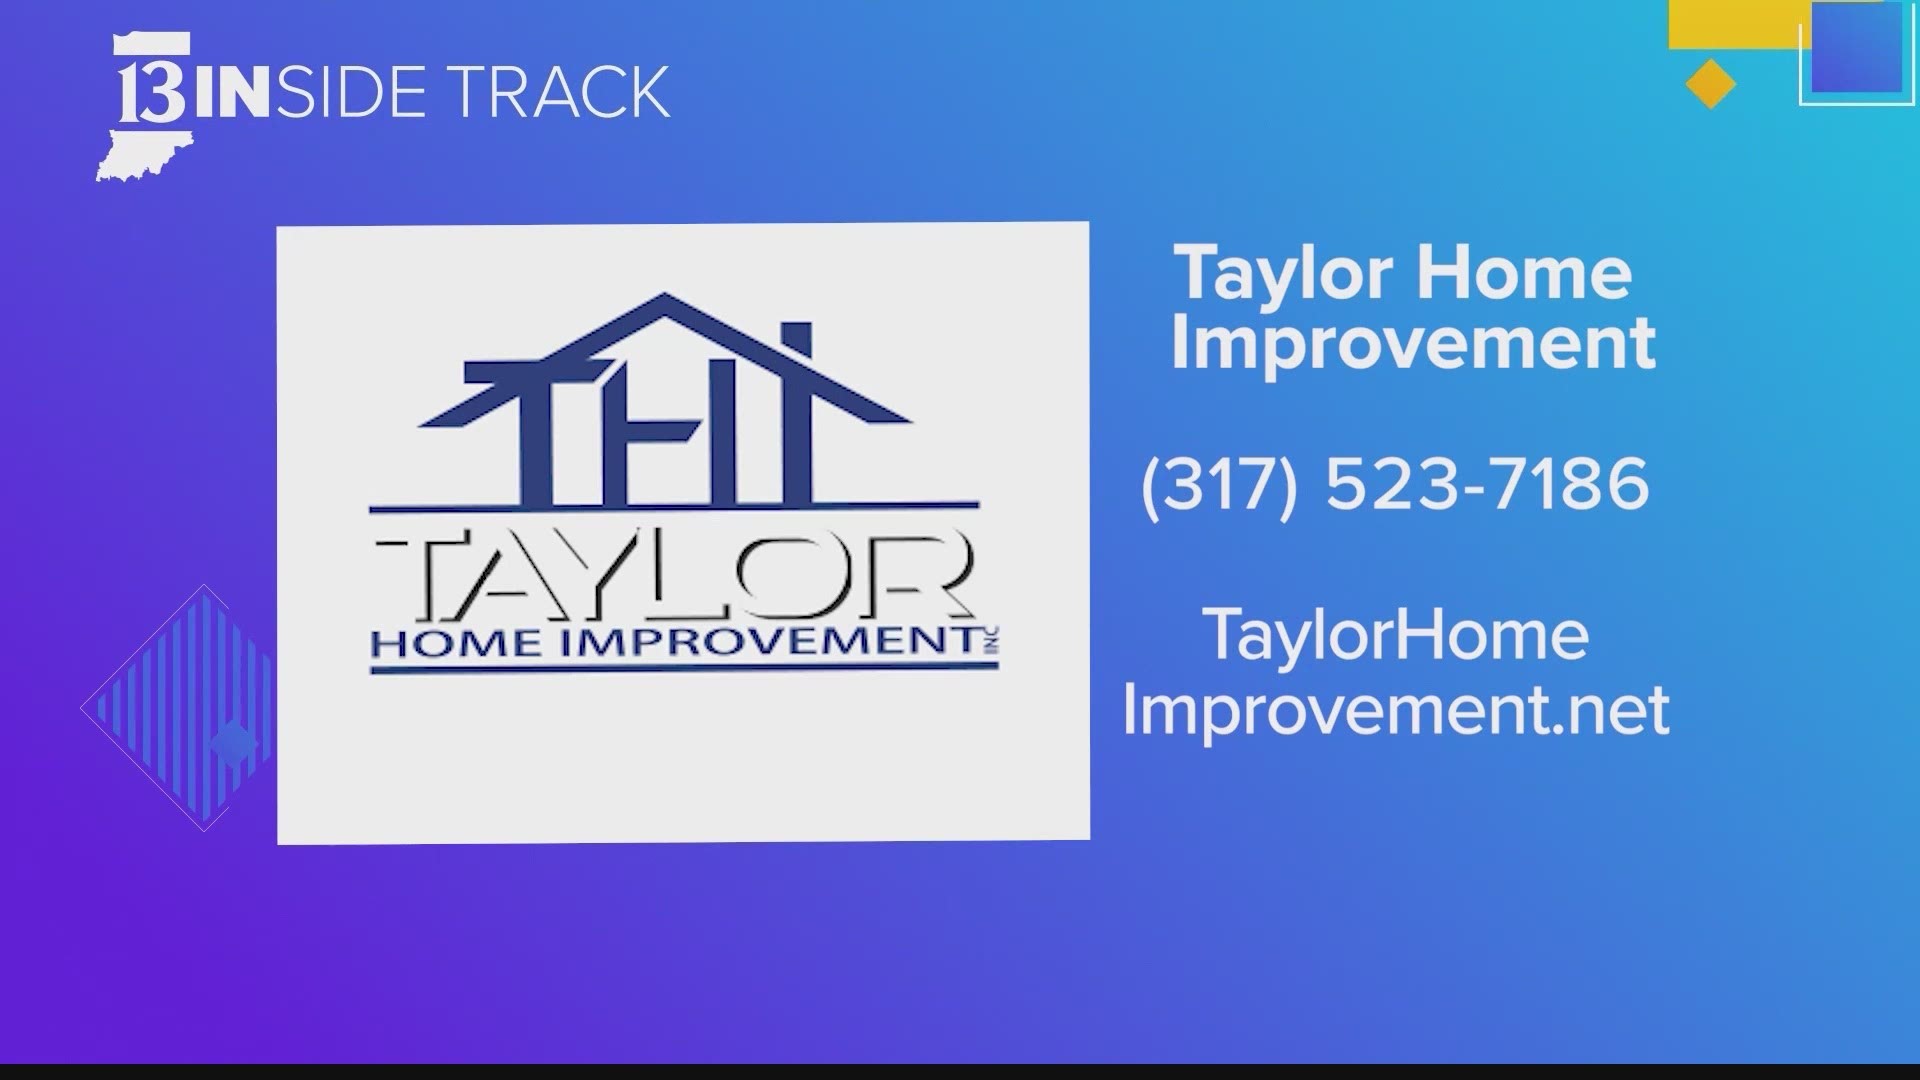 From interiors to exteriors, Taylor Home Improvement can handle nearly every project around your house.